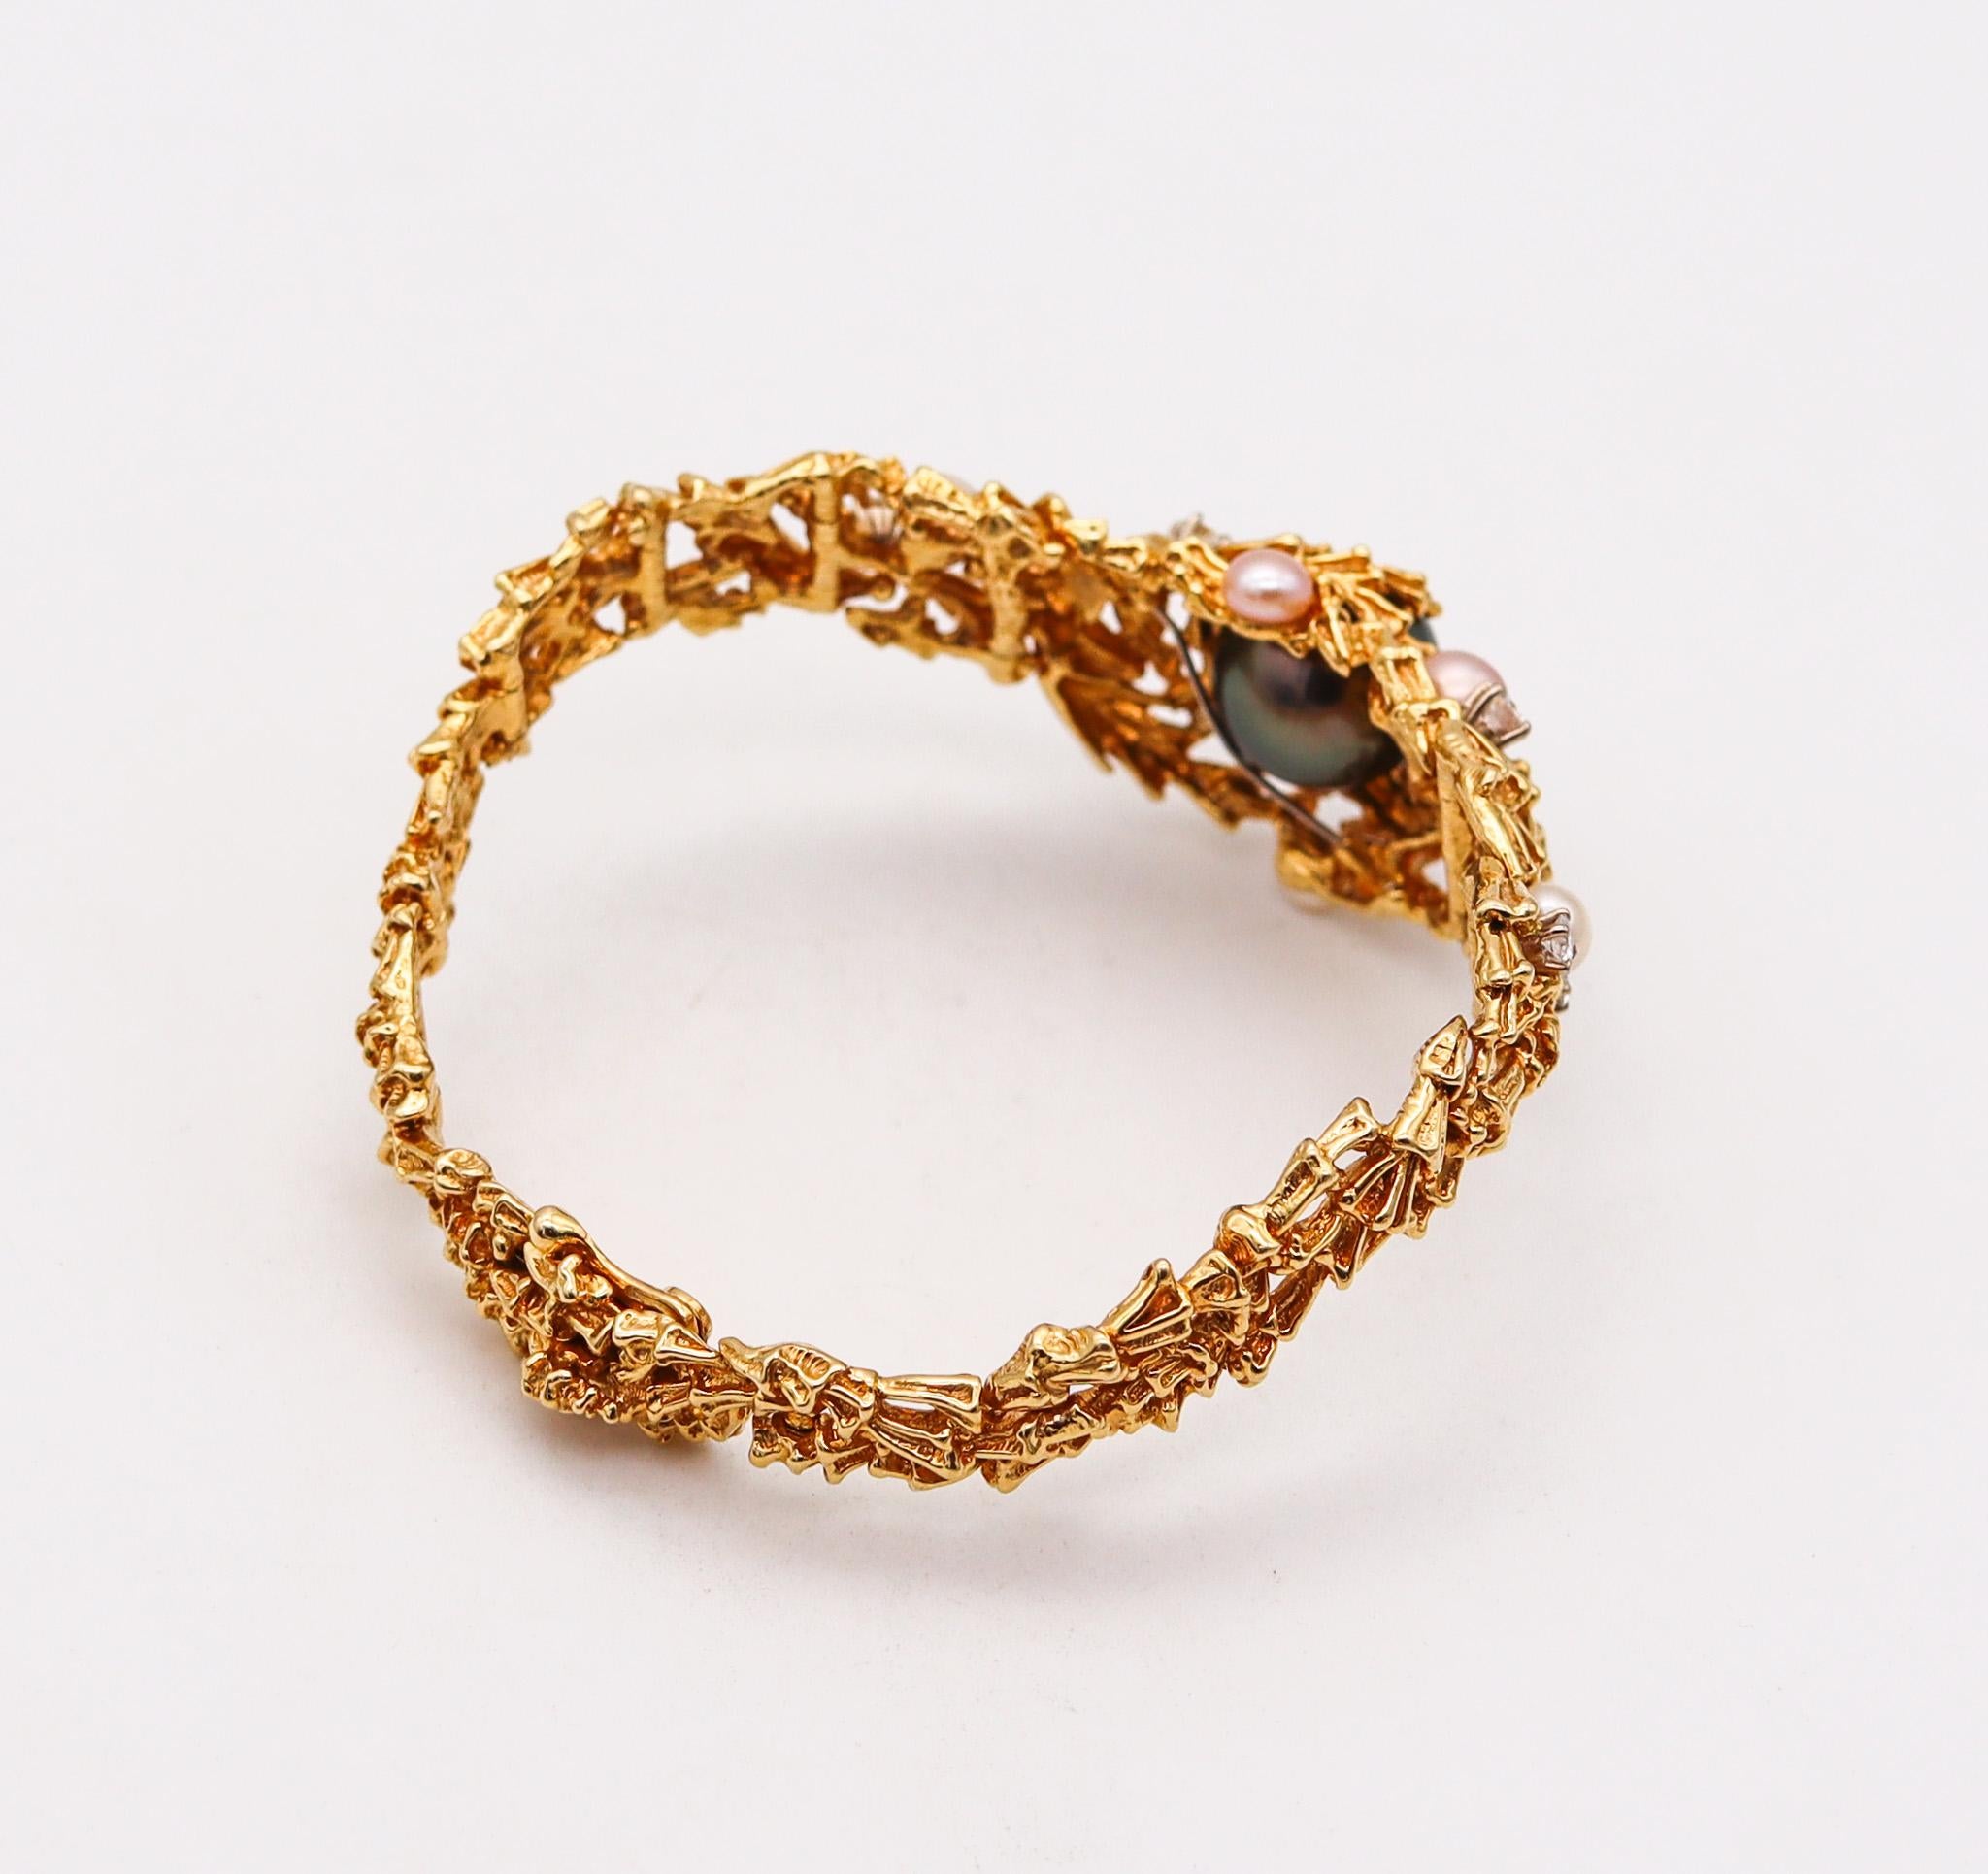 Modernist Gilbert Albert 1970 Organic Bracelet In 18Kt Yellow Gold With Diamonds And Pearl For Sale